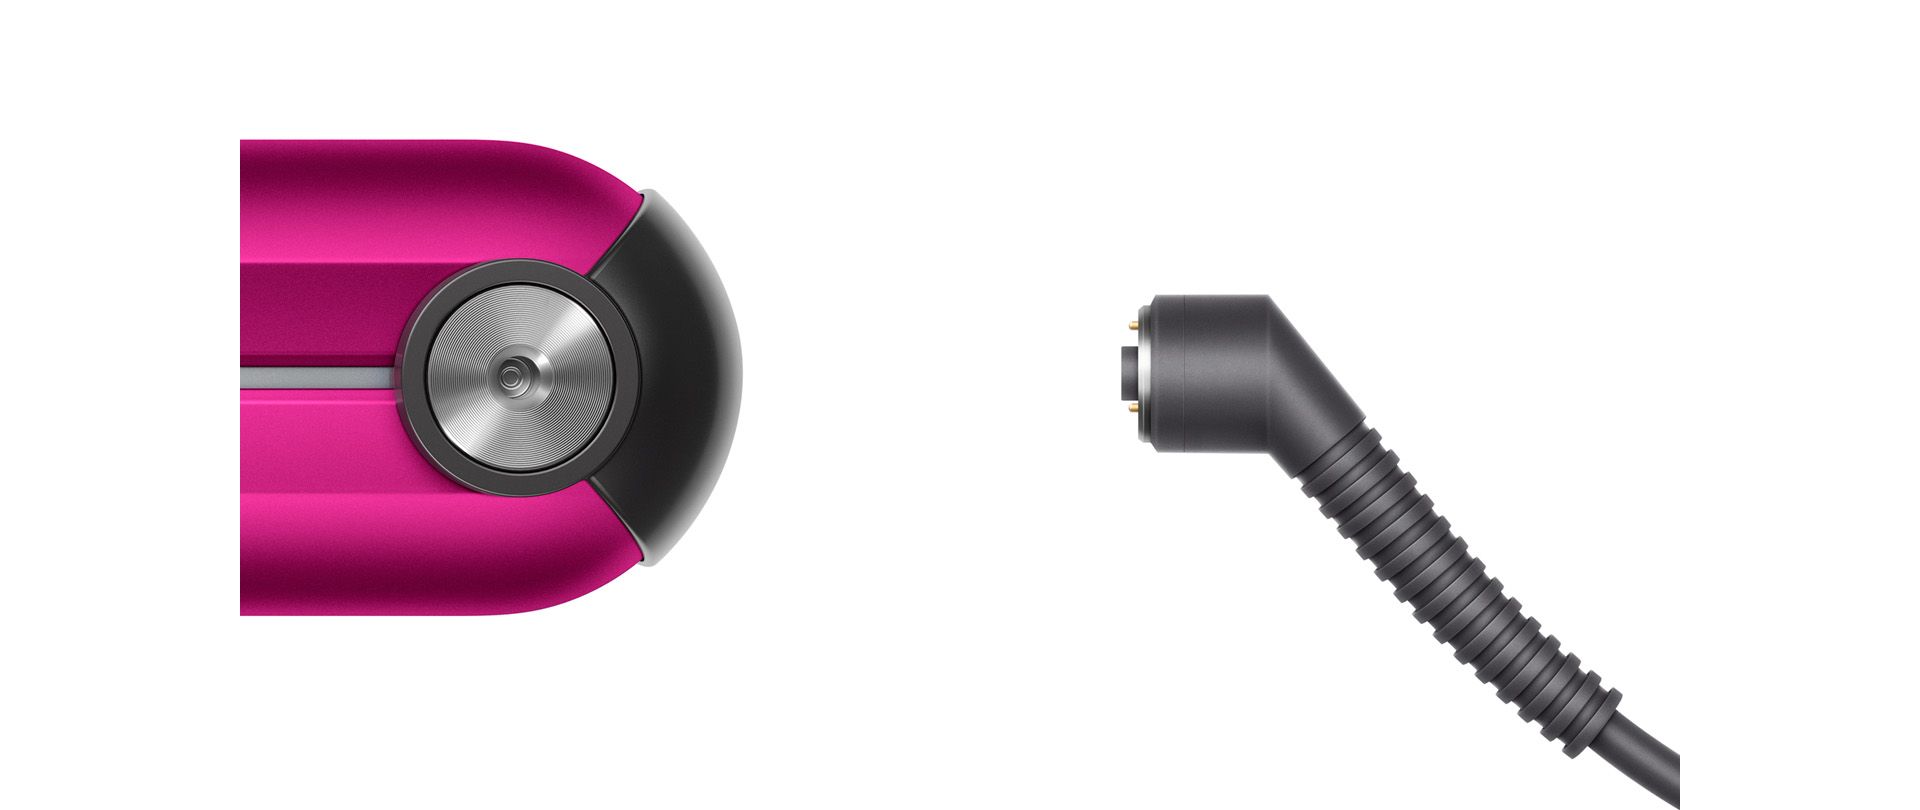 https://dyson-h.assetsadobe2.com/is/image/content/dam/dyson/leap-petite-global/products/personal-care/q1-gifting-mothers-day-2022/corrale-pdp/gallery-images/Corrale-1440x810-Gallery-Image-7.jpg?&cropPathE=desktop&fit=stretch,1&fmt=pjpeg&wid=1920